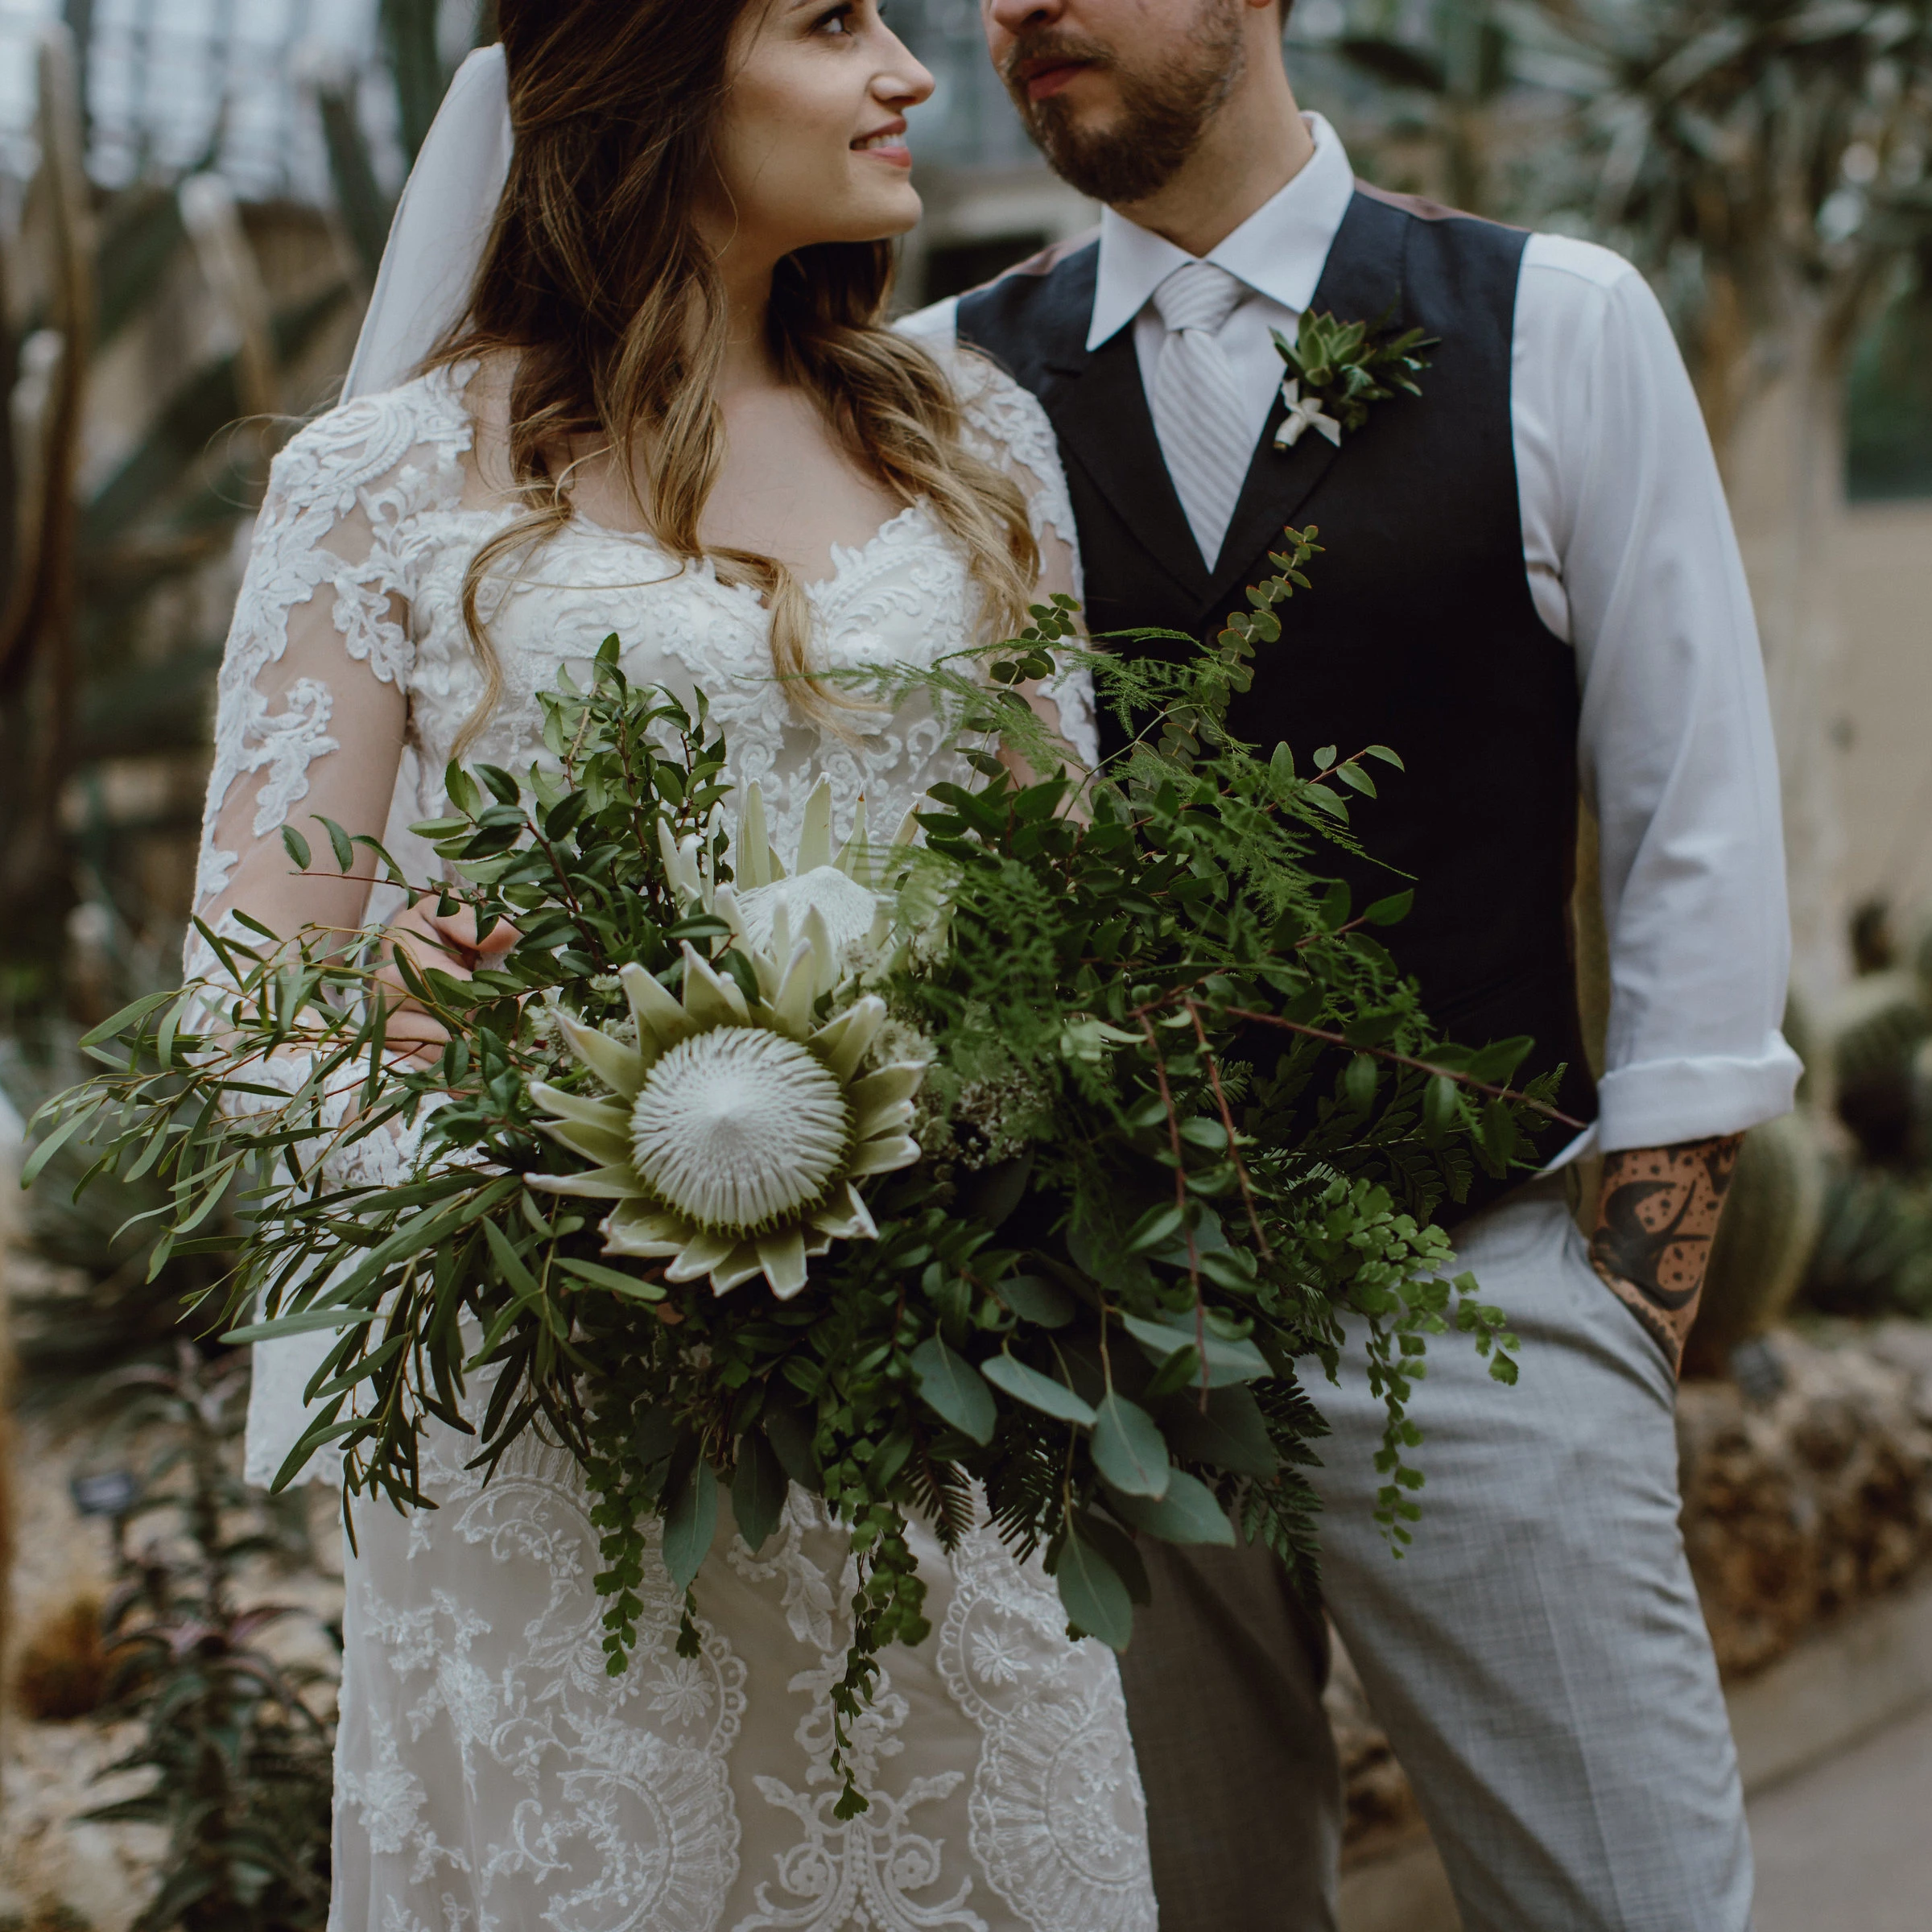 Bride and groom in moody photography style looking at each other. Bride is holding a large greenery arrangement with a large white protea as the focal point